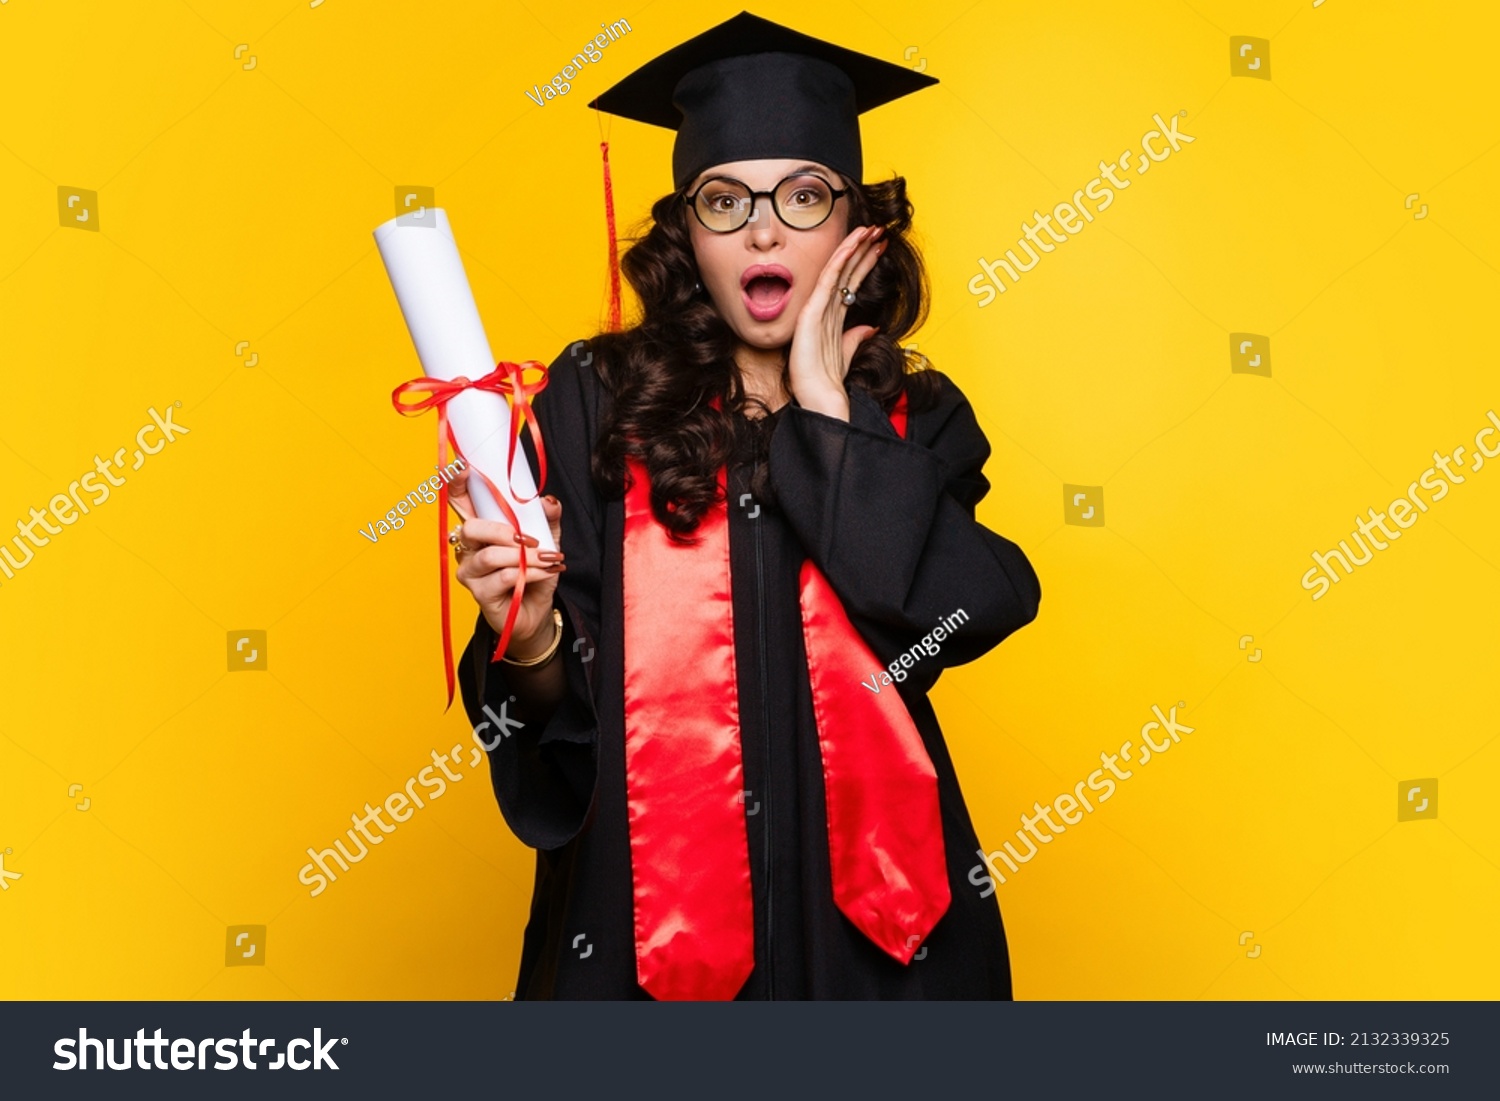 Shocked Girl graduate in graduation hat and eyewear with diploma on yellow backdrop. pleasantly surprised young woman wearing graduation cap and ceremony robe holding Certificate. Education Concept #2132339325